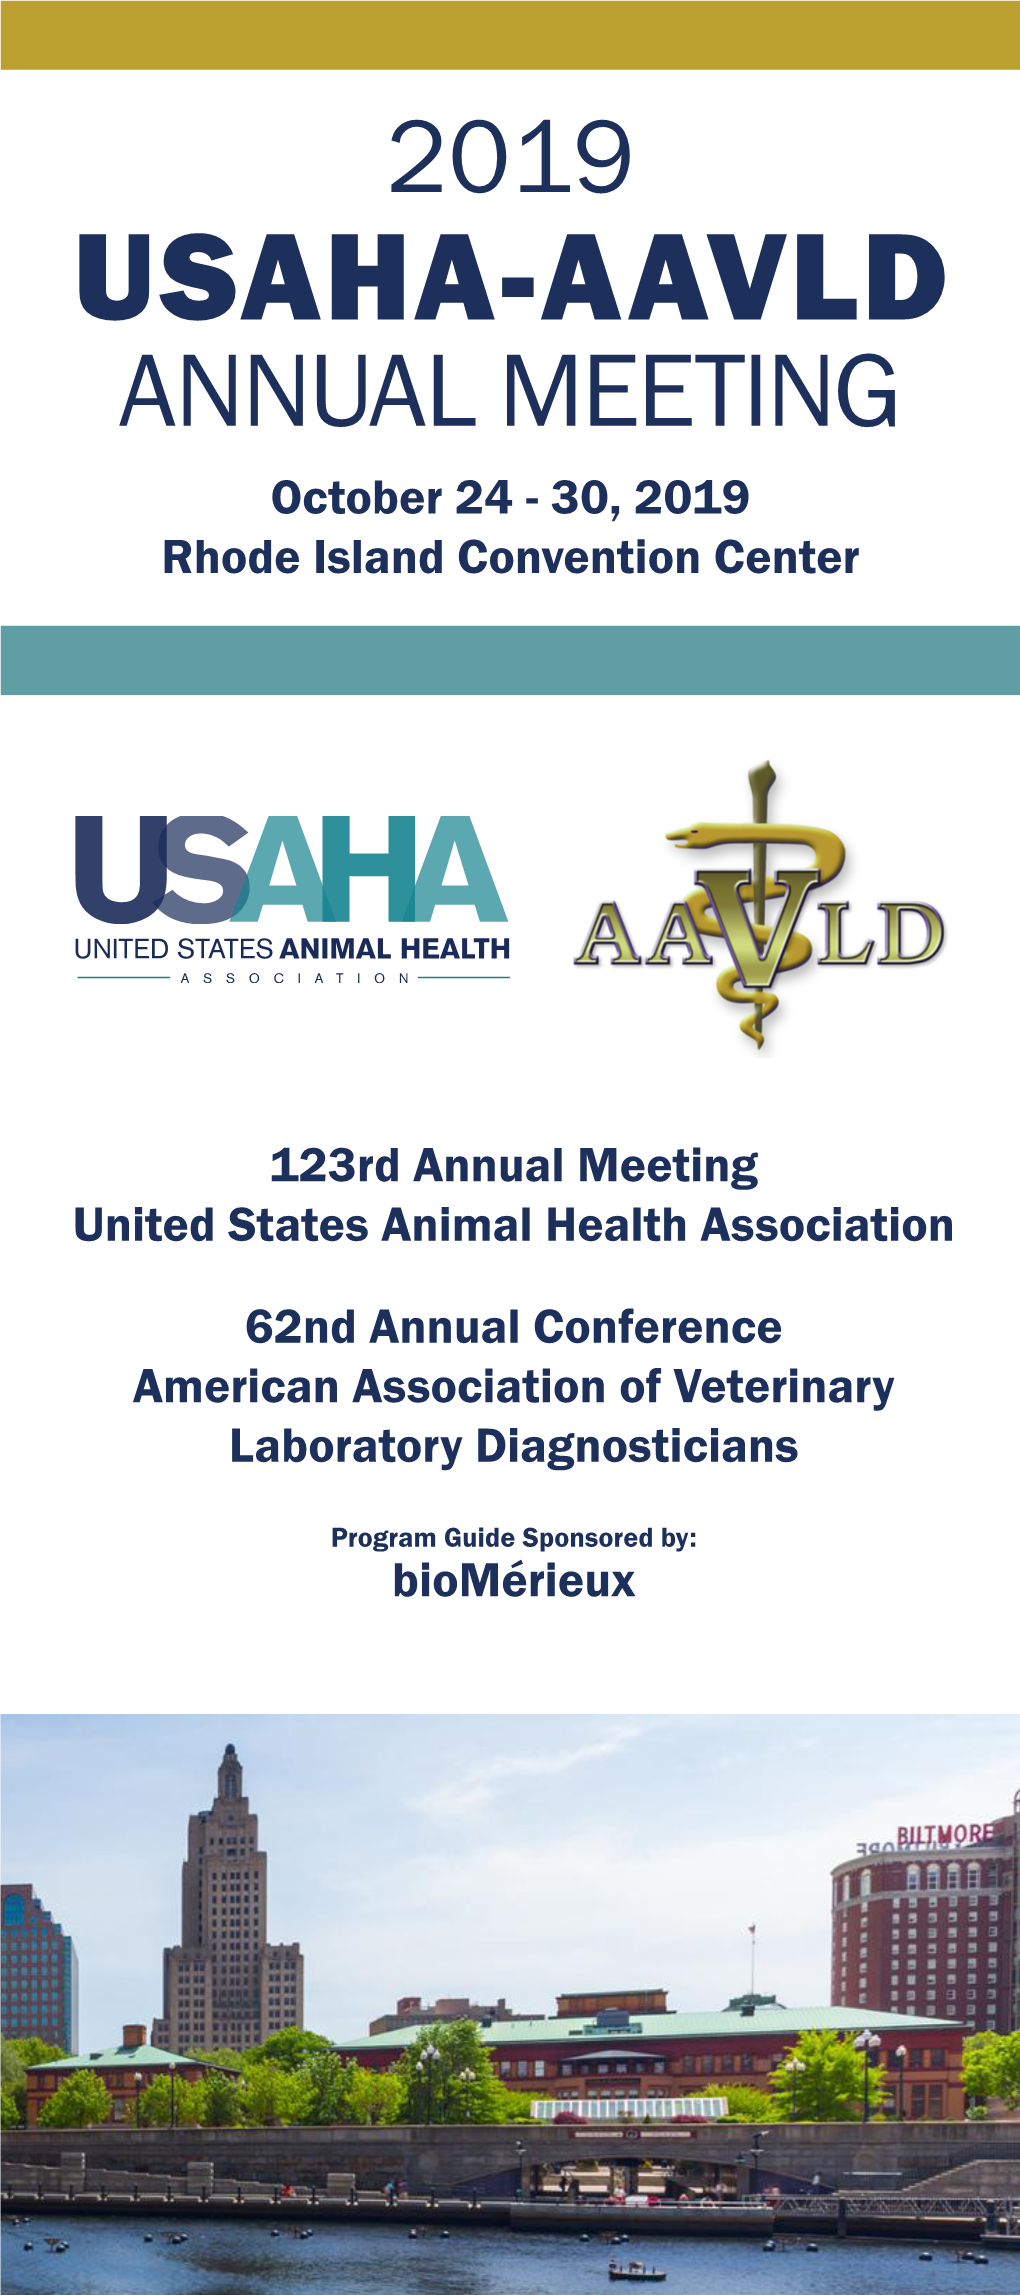 USAHA-AAVLD ANNUAL MEETING October 24 - 30, 2019 Rhode Island Convention Center